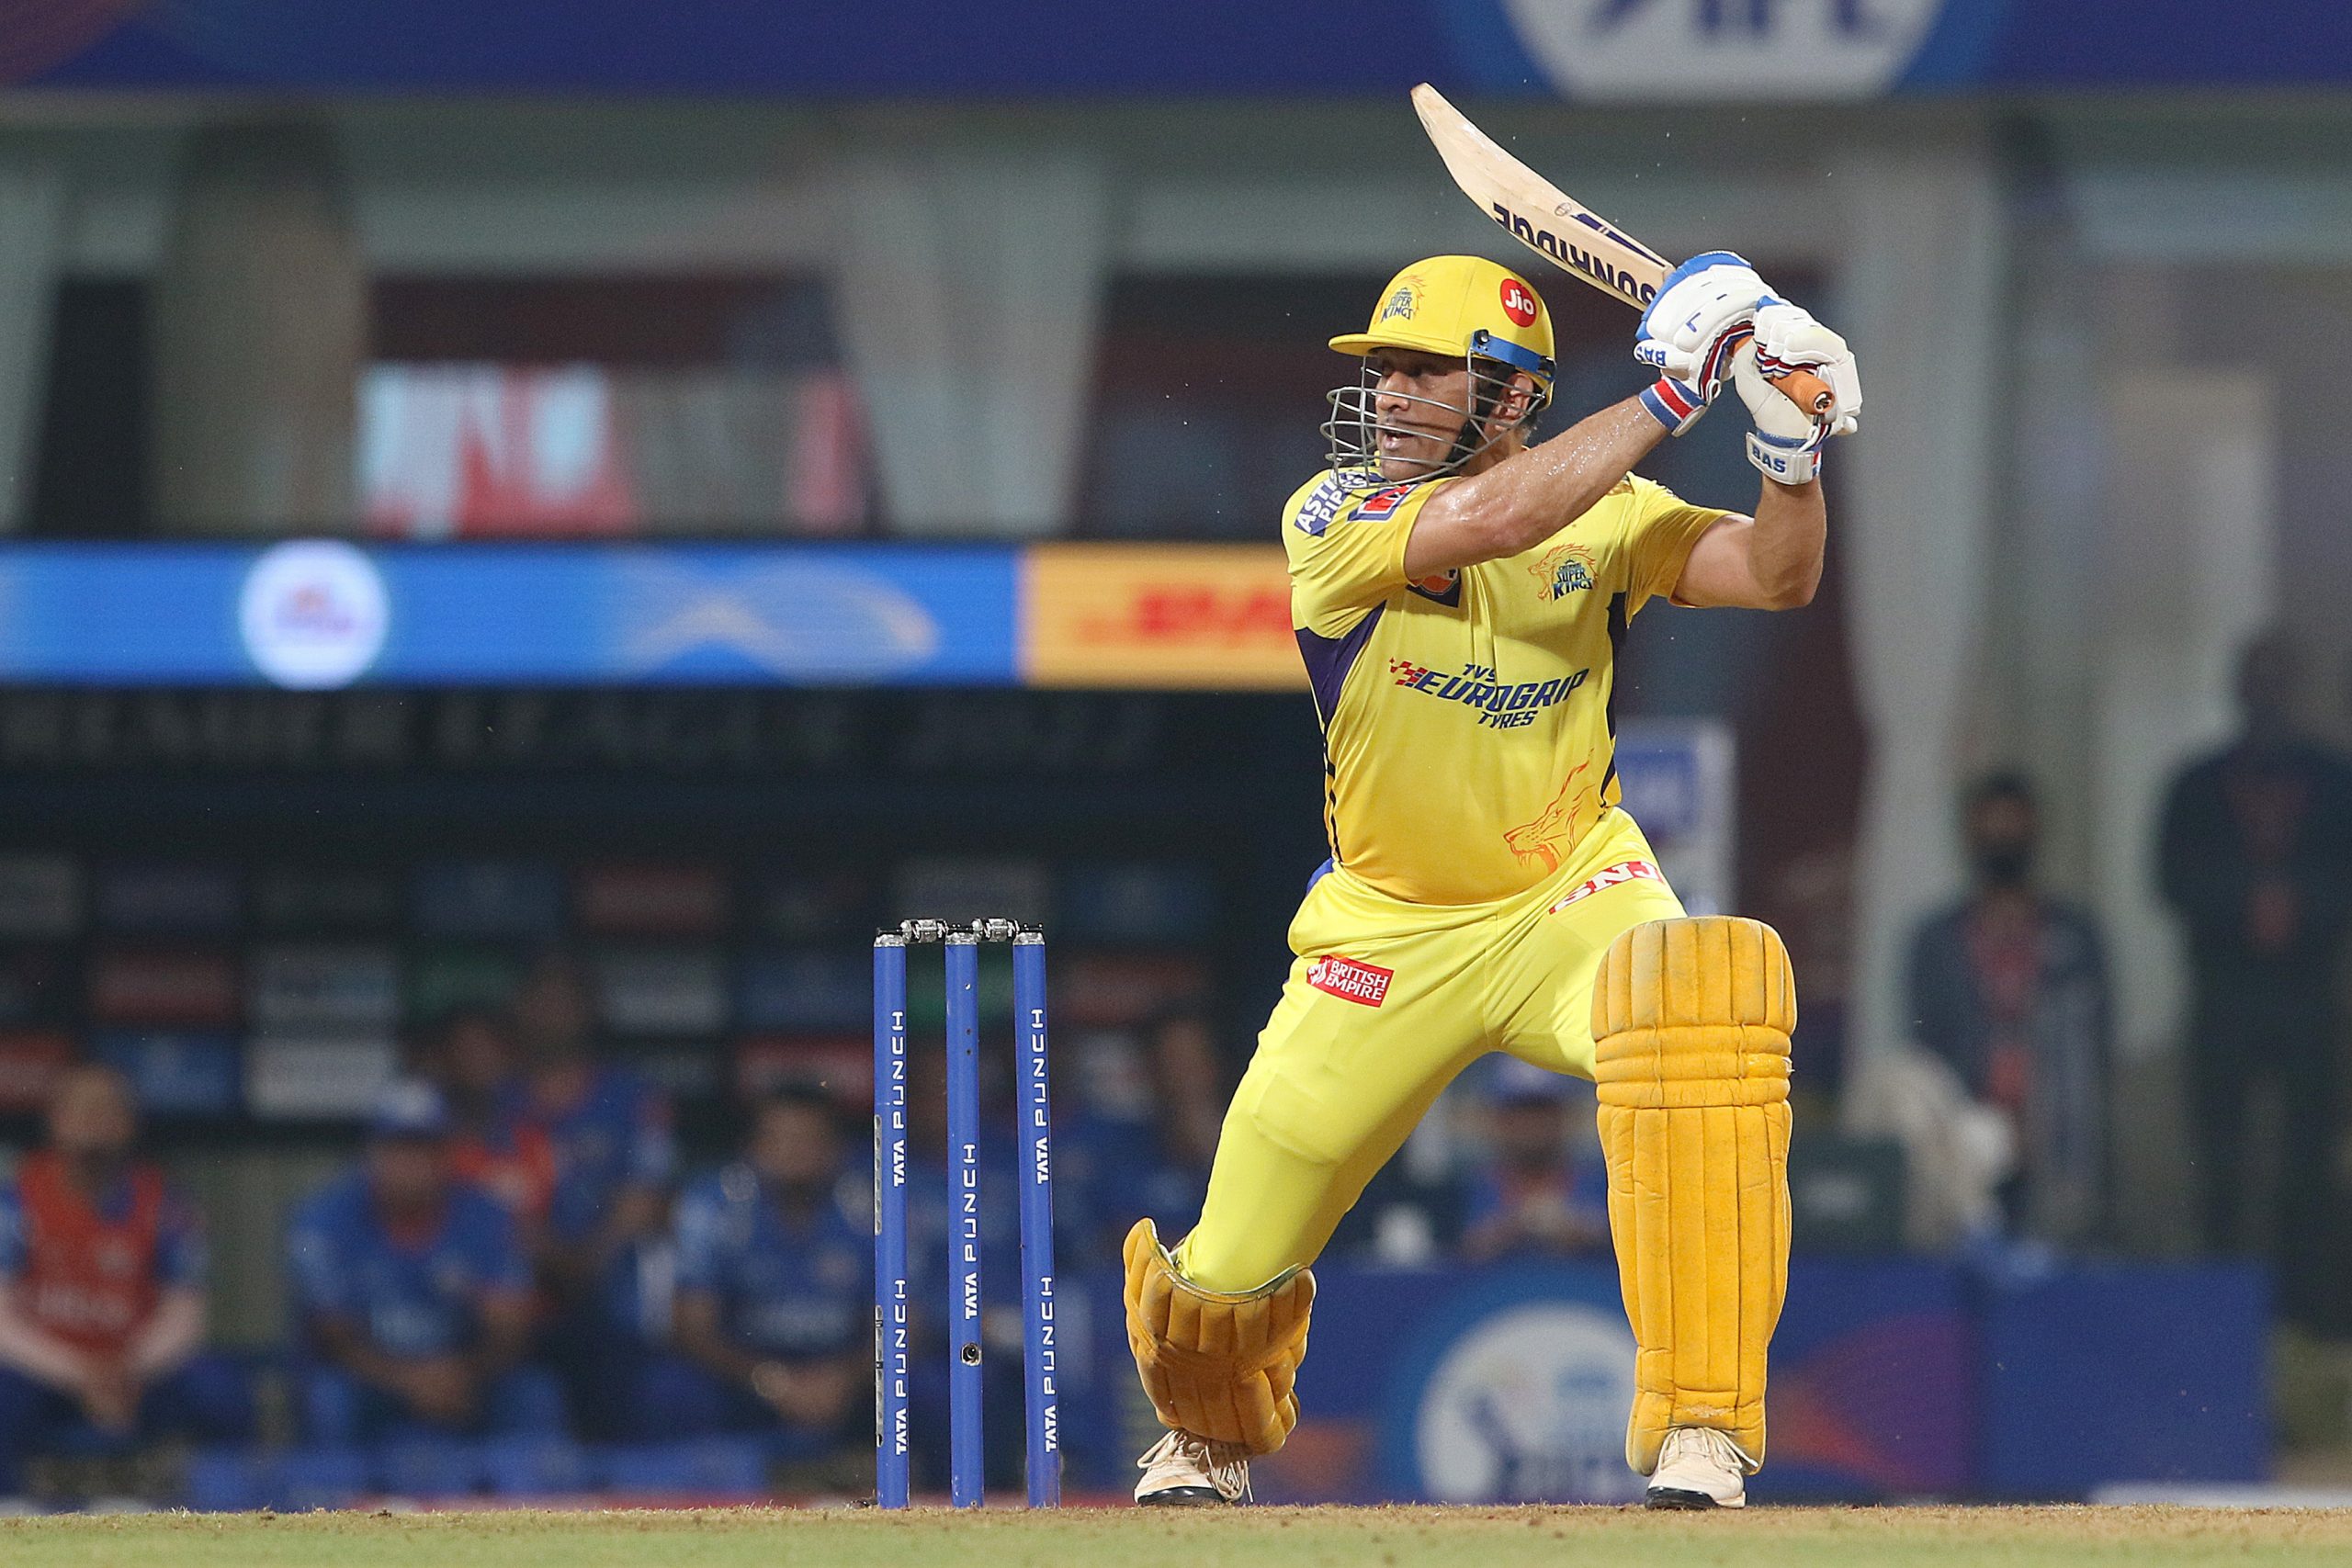 IPL 2022: Watch Dhoni lose his cool over Mukesh Choudhary’s final over wide